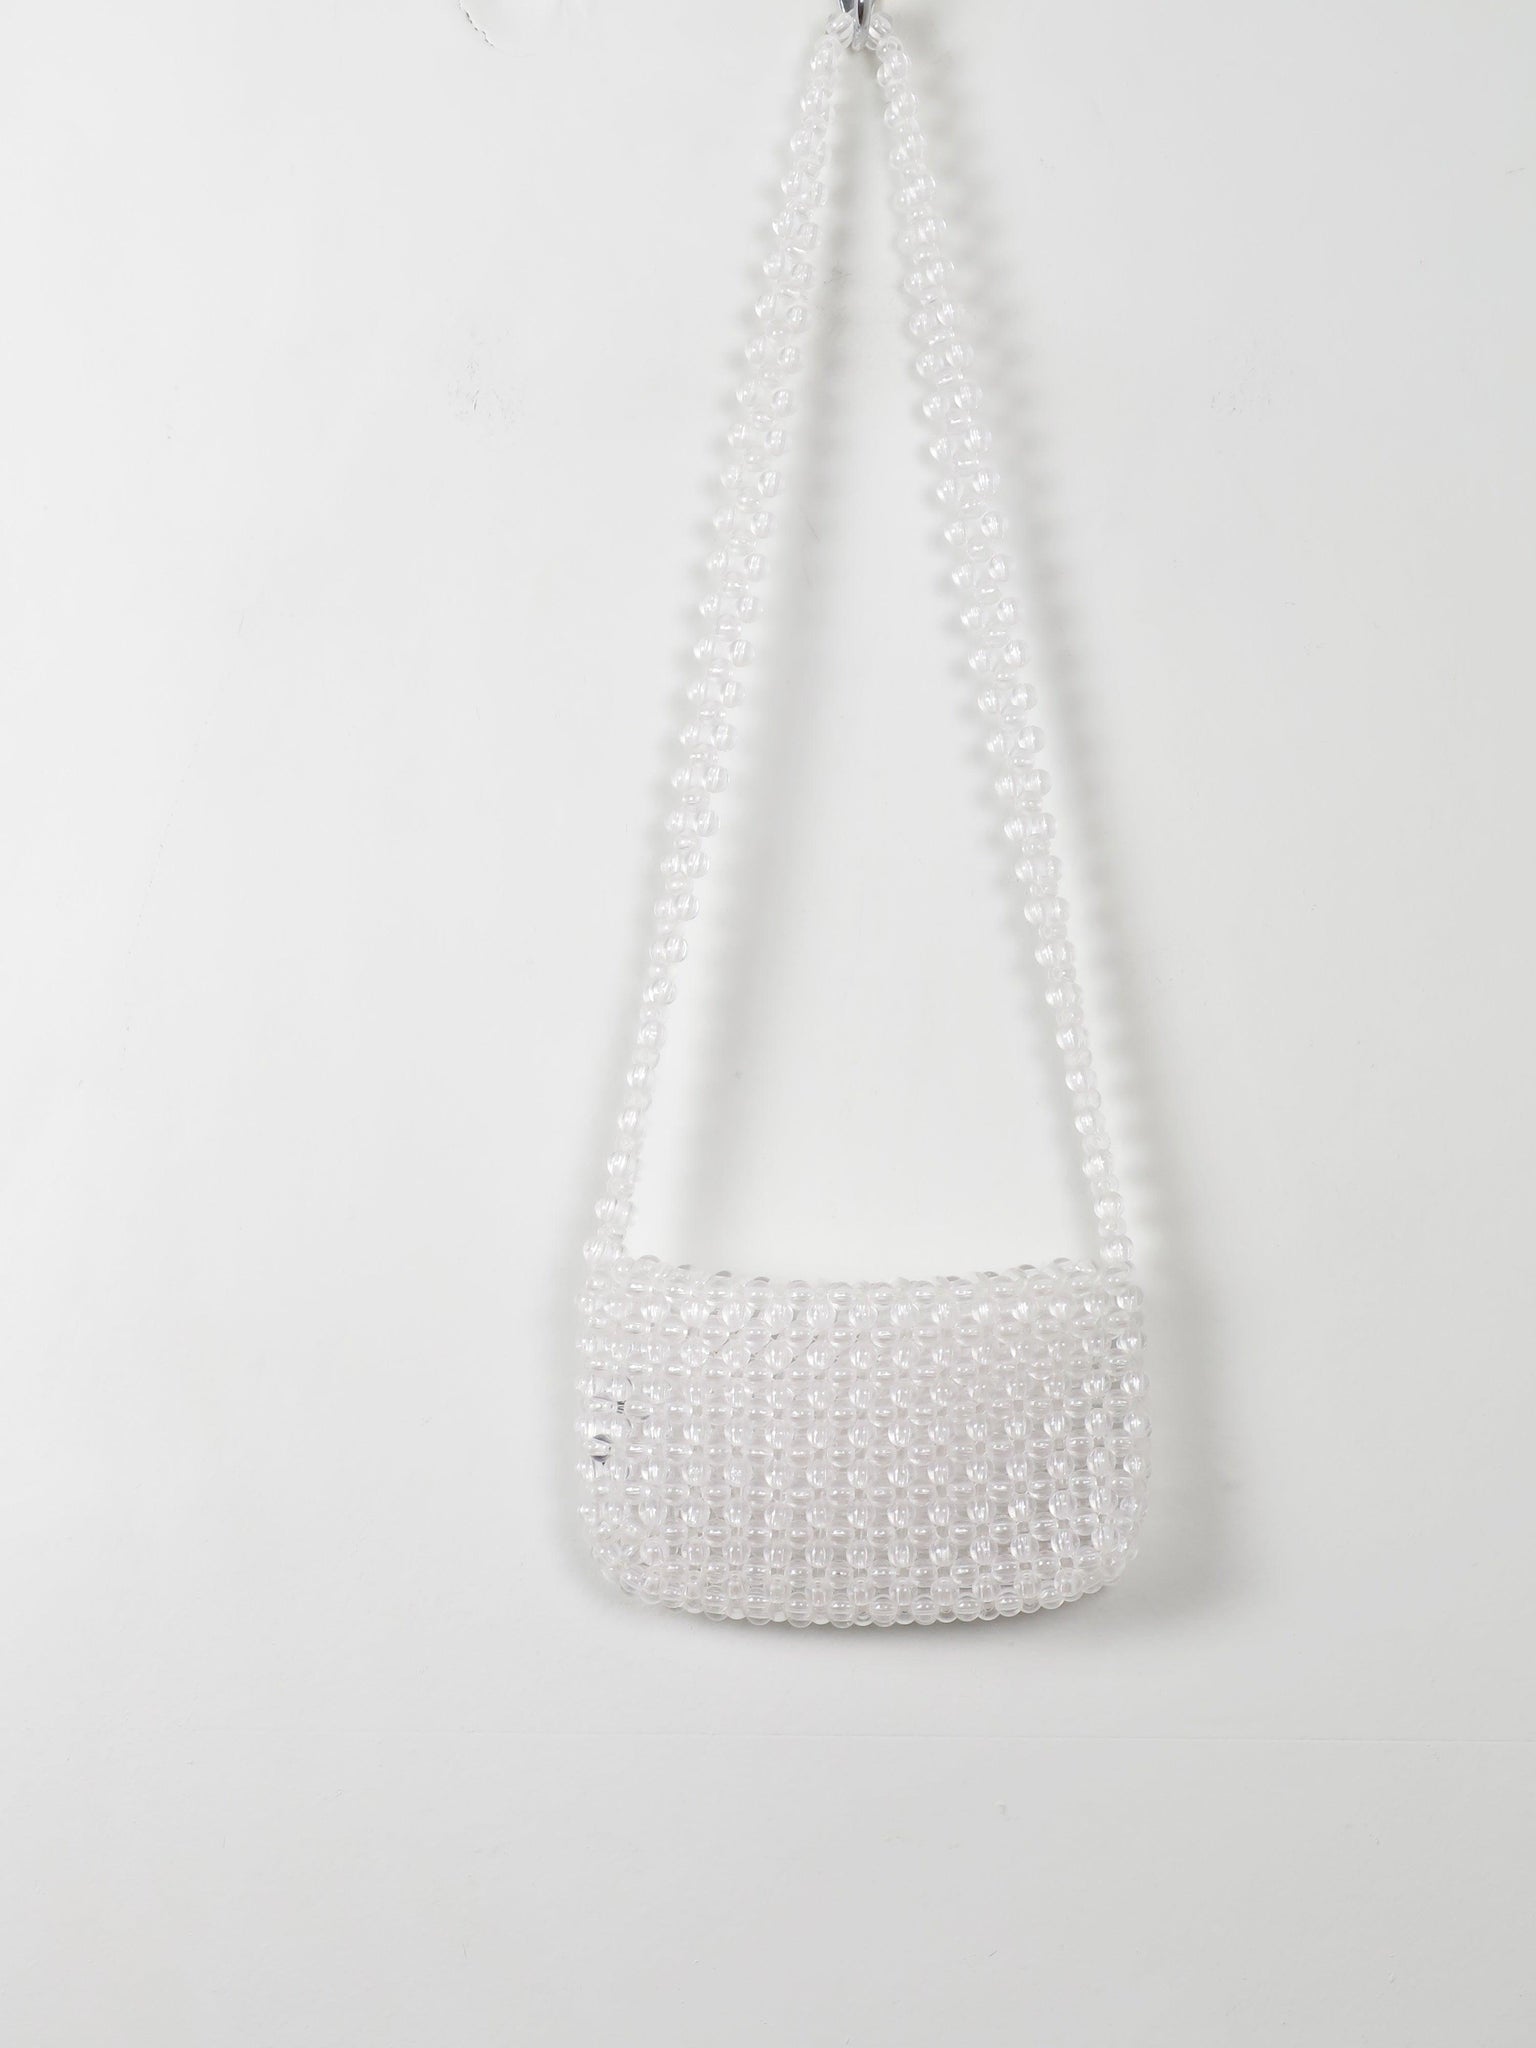 Women's Vintage Clear Beaded Bag - The Harlequin